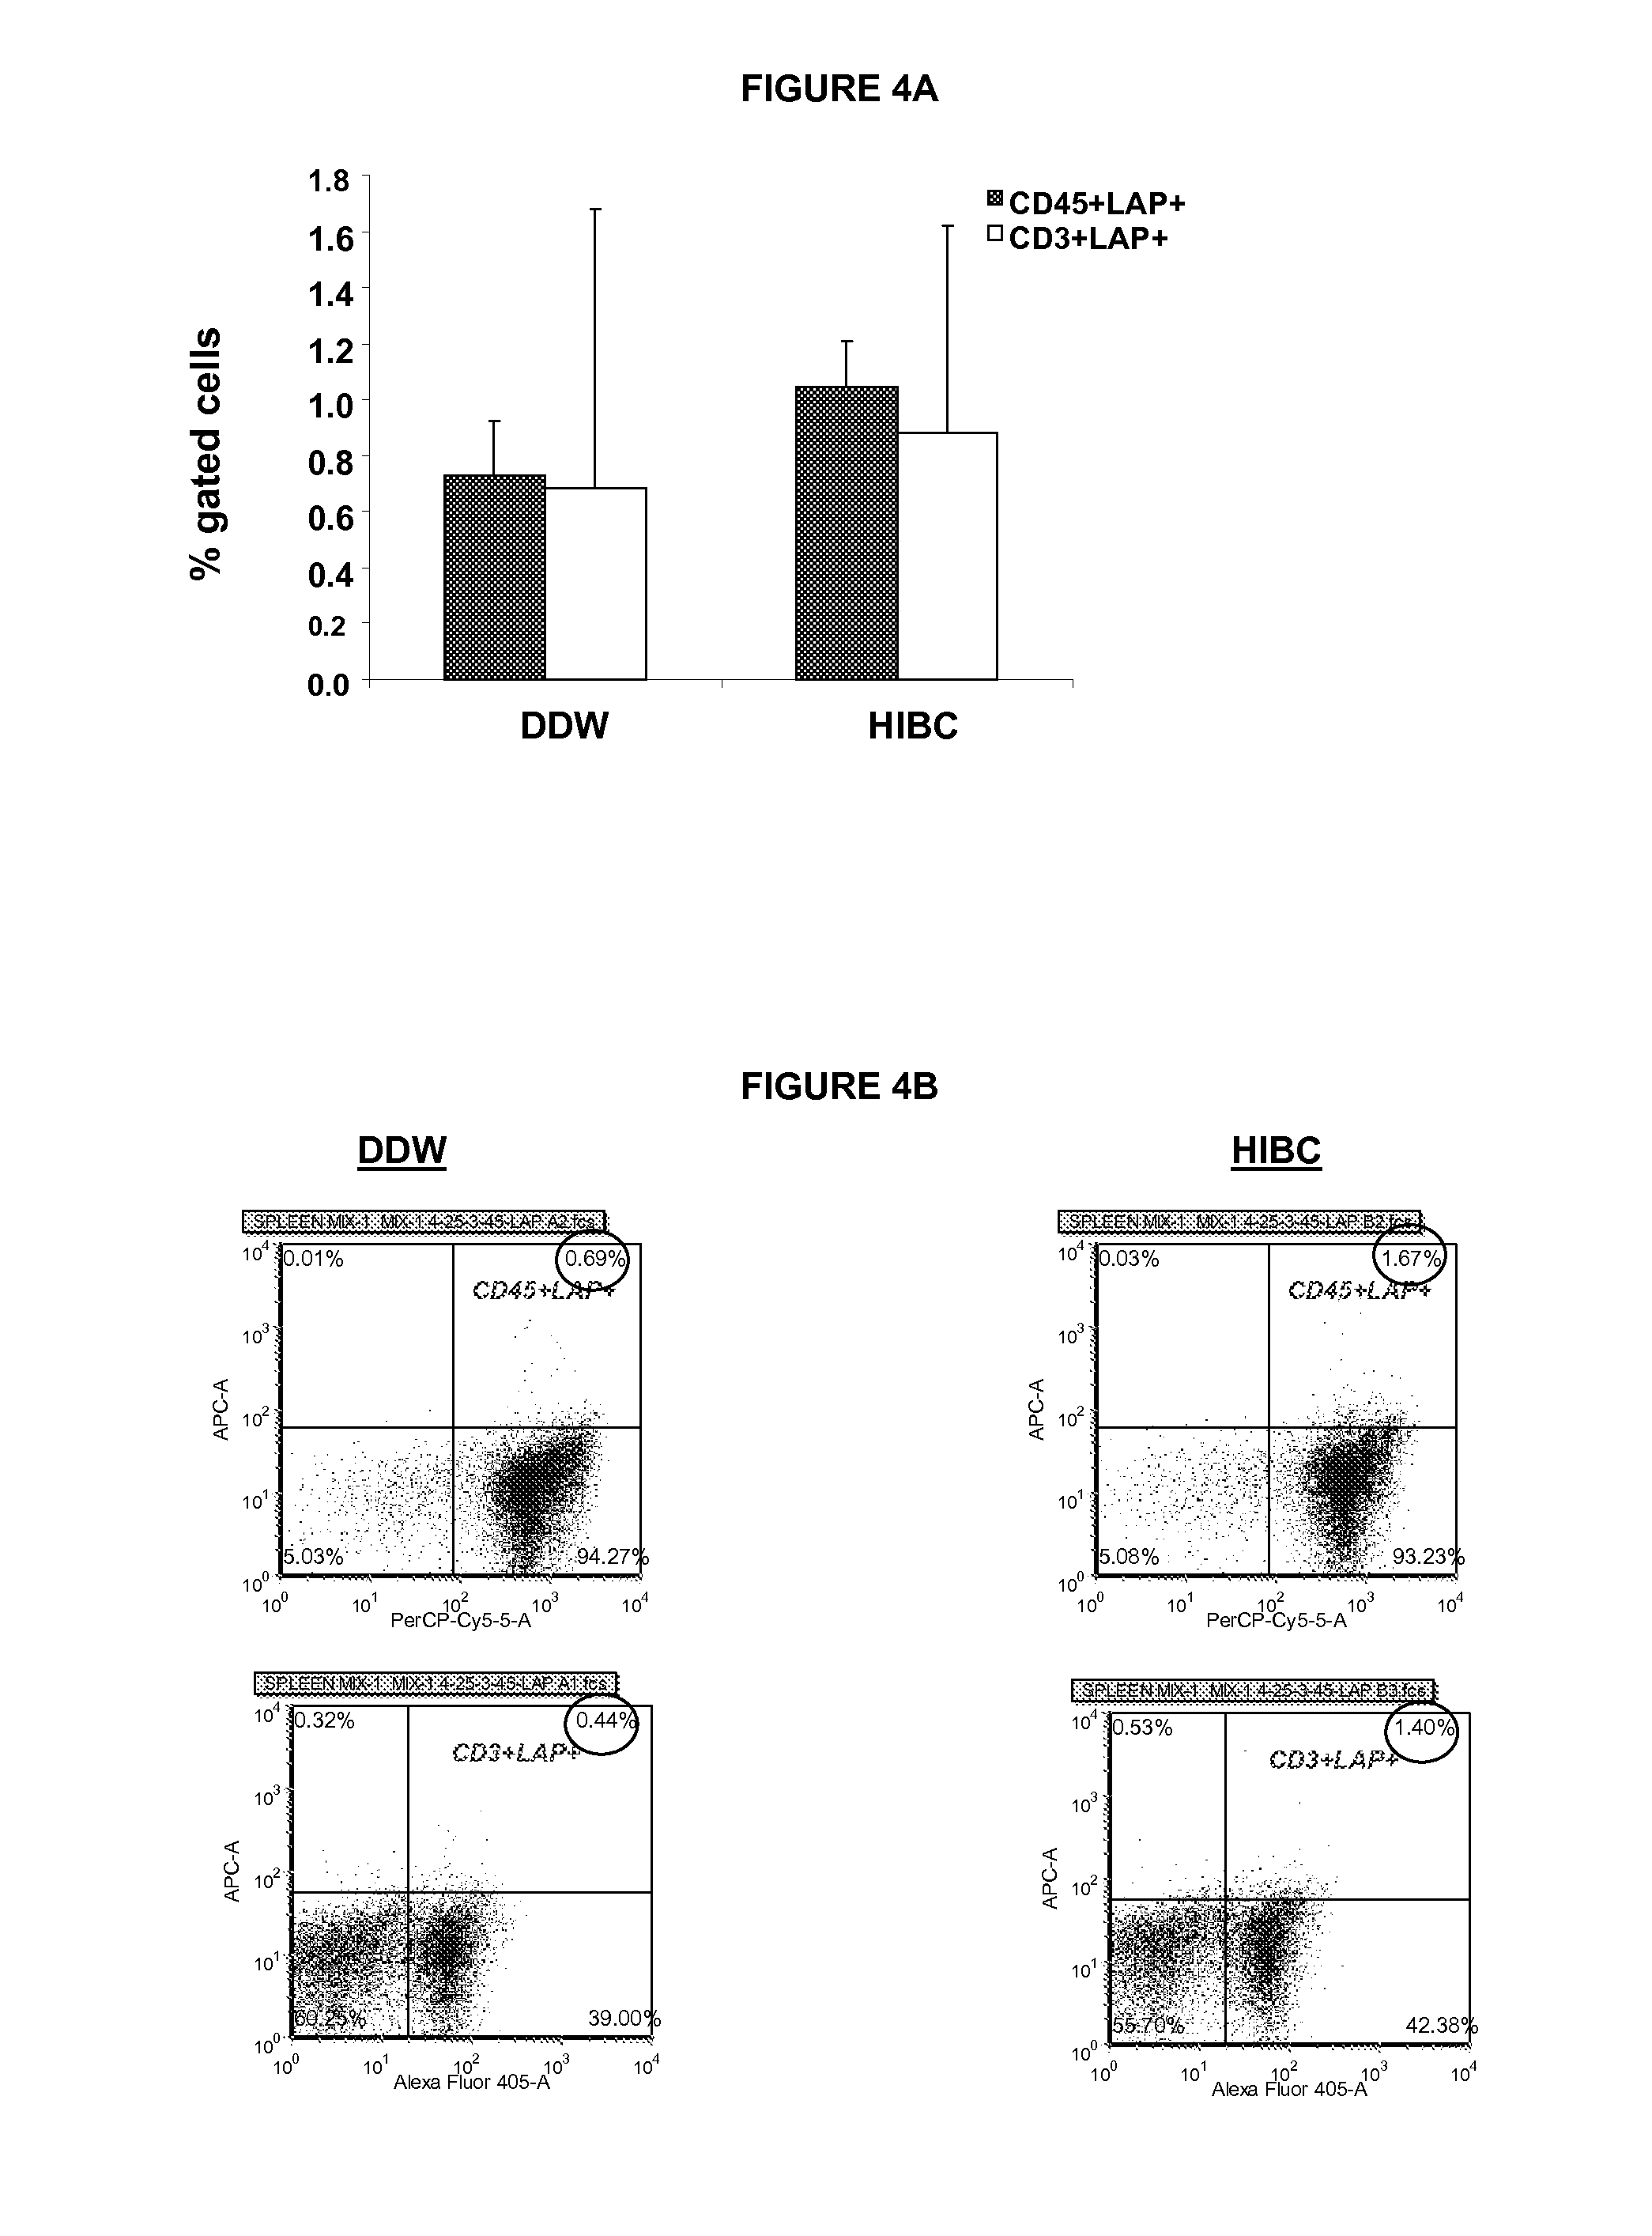 Anti-lps enriched immunoglobulin for use in treatment and/or prophylaxis of a pathologic disorder